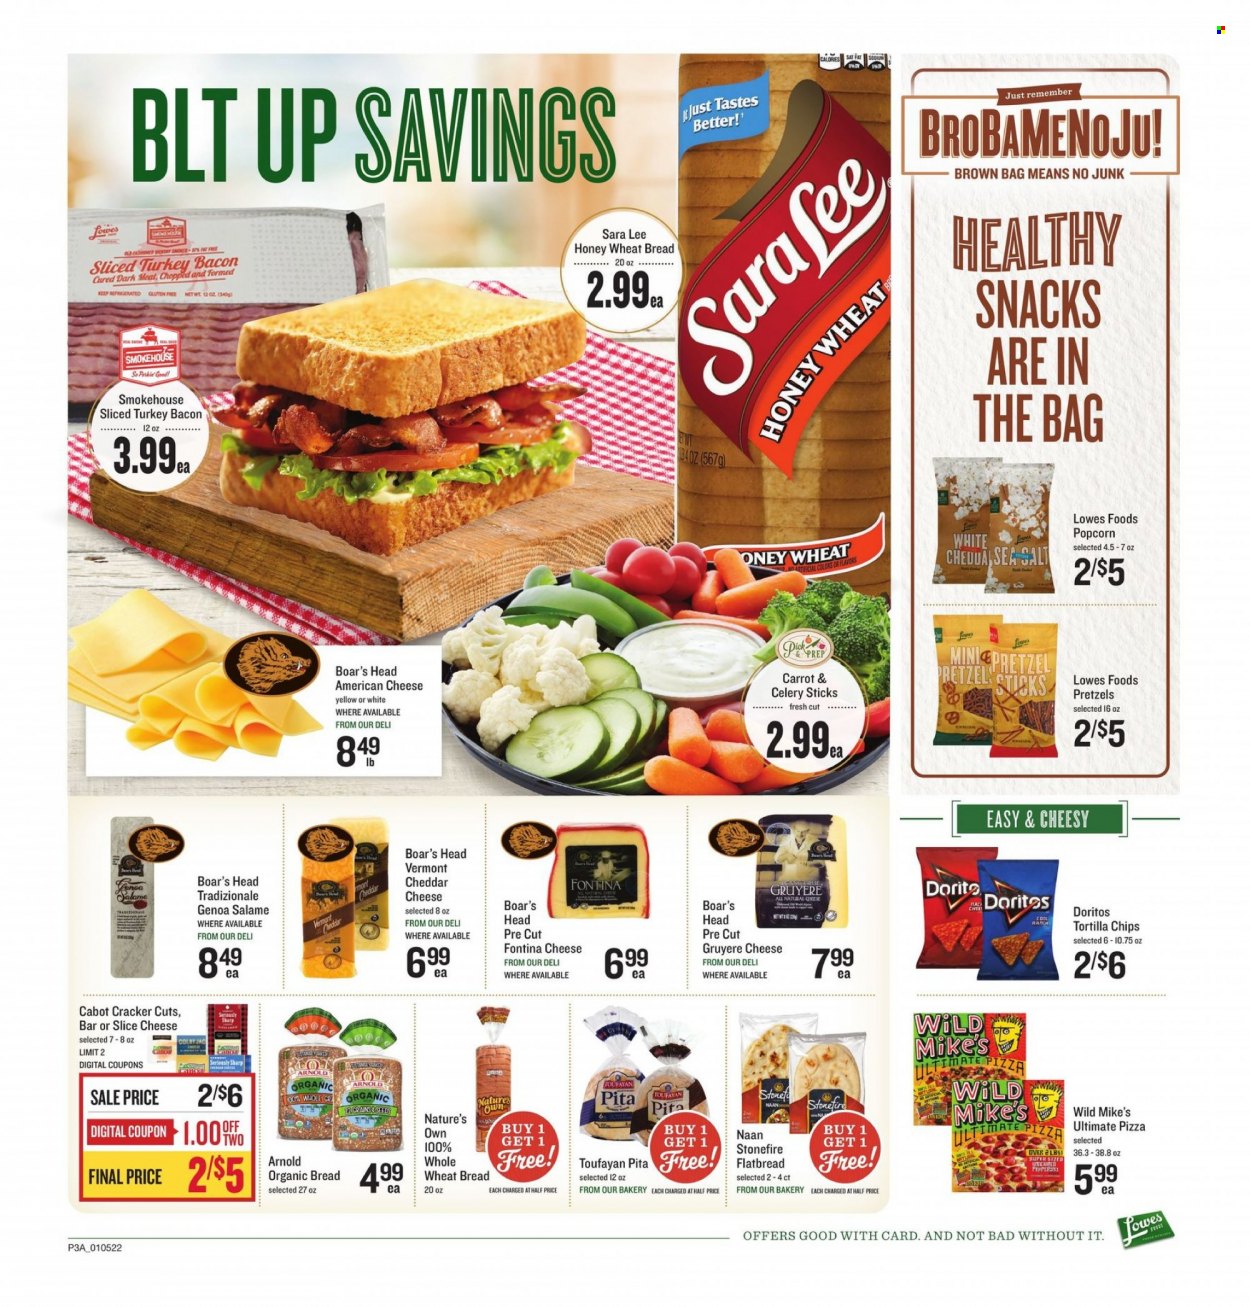 thumbnail - Lowes Foods Flyer - 01/05/2022 - 01/11/2022 - Sales products - wheat bread, pita, pretzels, flatbread, Sara Lee, pizza, bacon, sliced turkey, turkey bacon, american cheese, Colby cheese, Fontina, Gruyere, sliced cheese, snack, crackers, Doritos, tortilla chips, chips, popcorn, celery sticks, Nature's Own. Page 4.